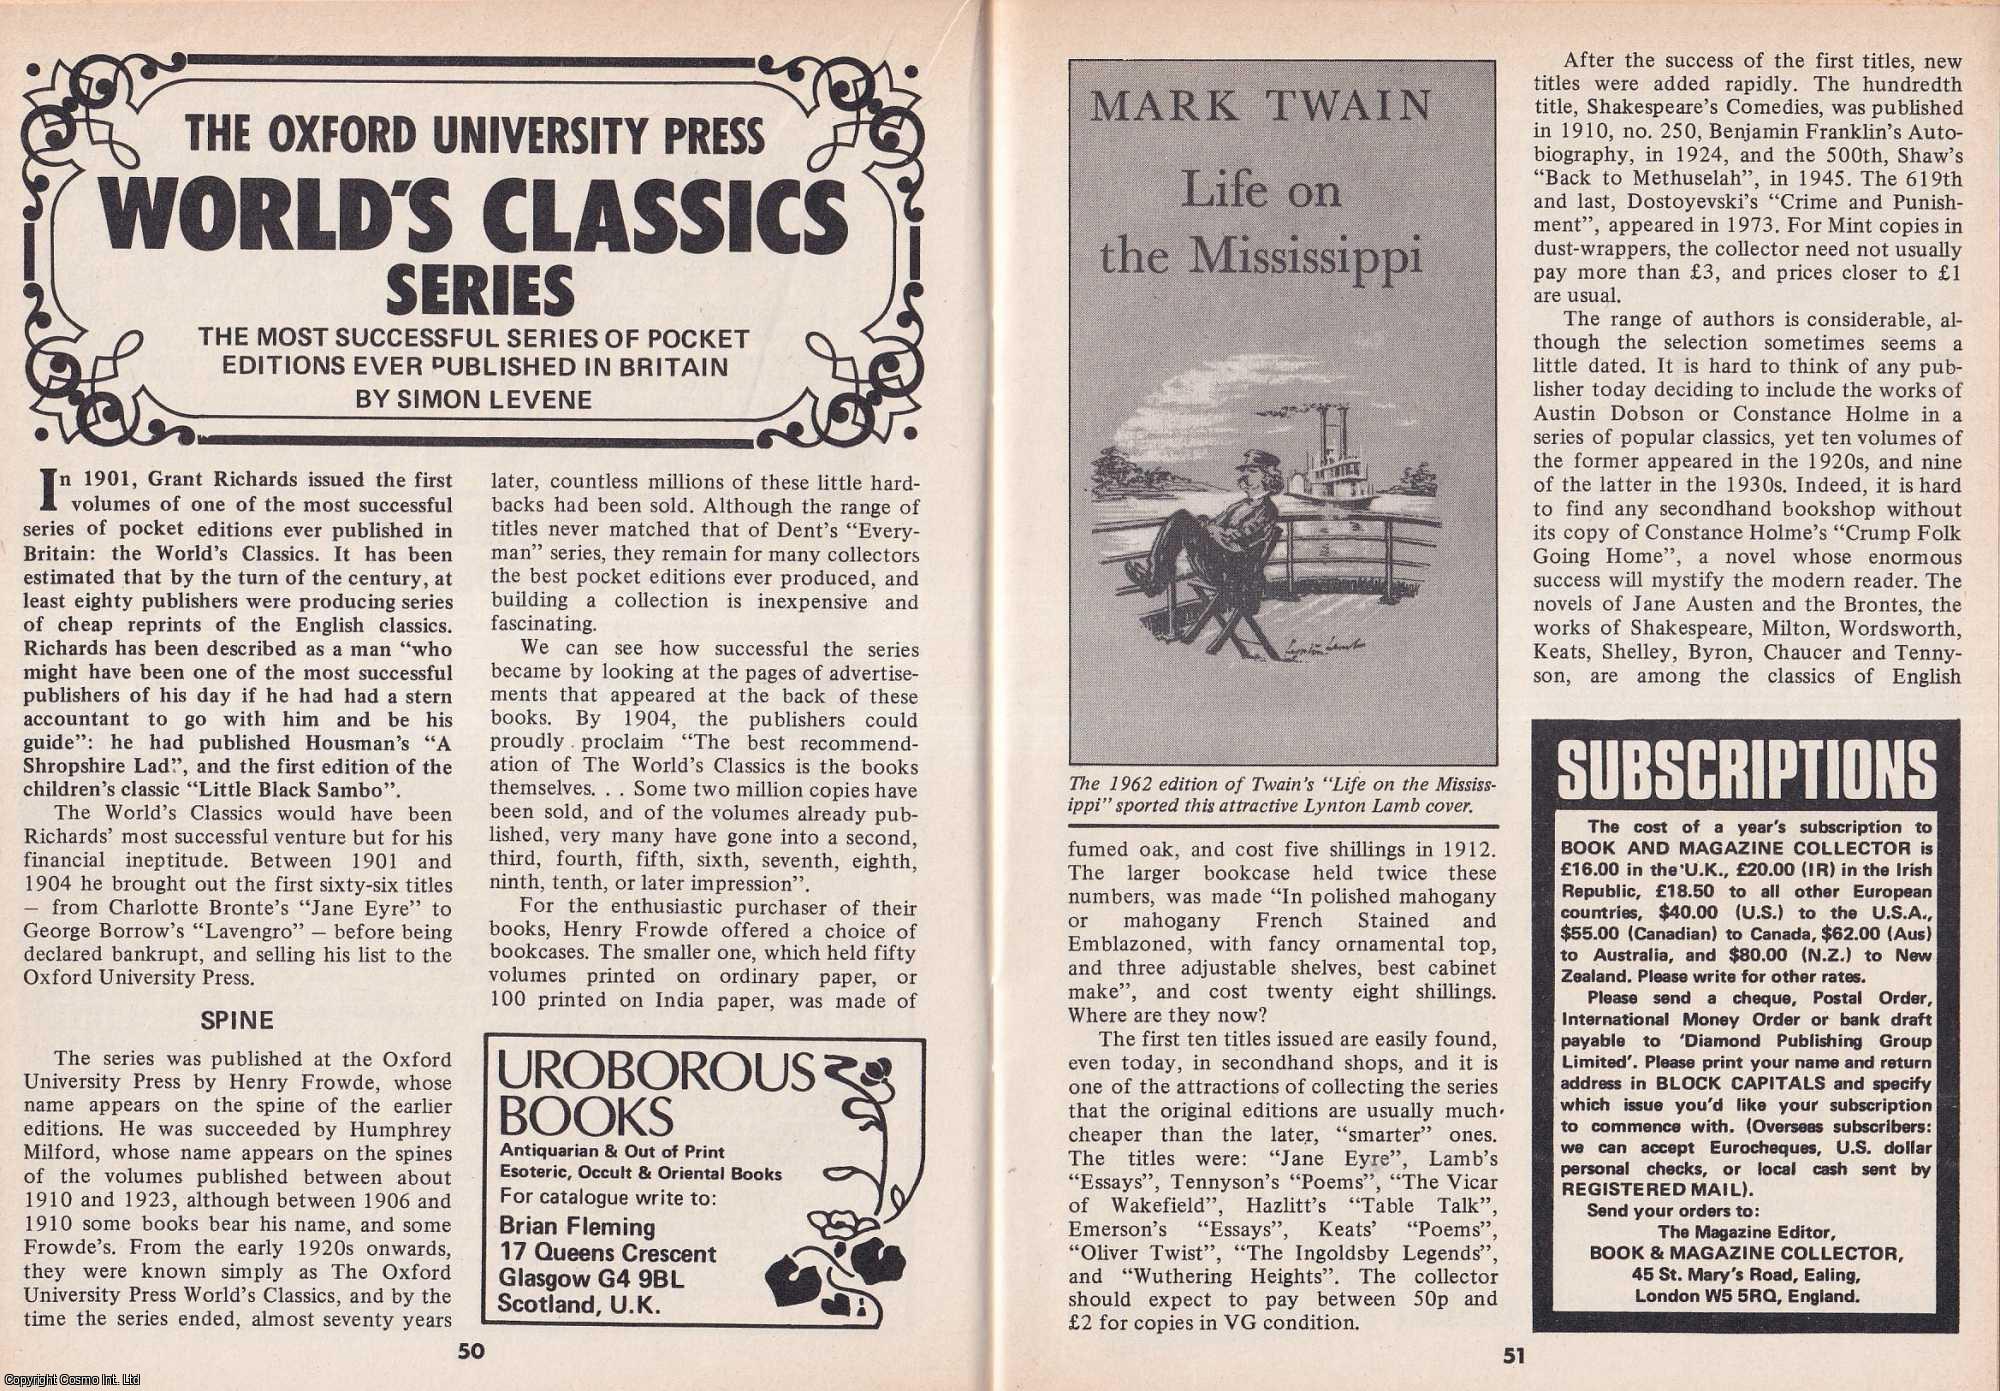 Simon Levene - The Oxford University Press World's Classic Series. This is an original article separated from an issue of The Book & Magazine Collector publication, 1986.